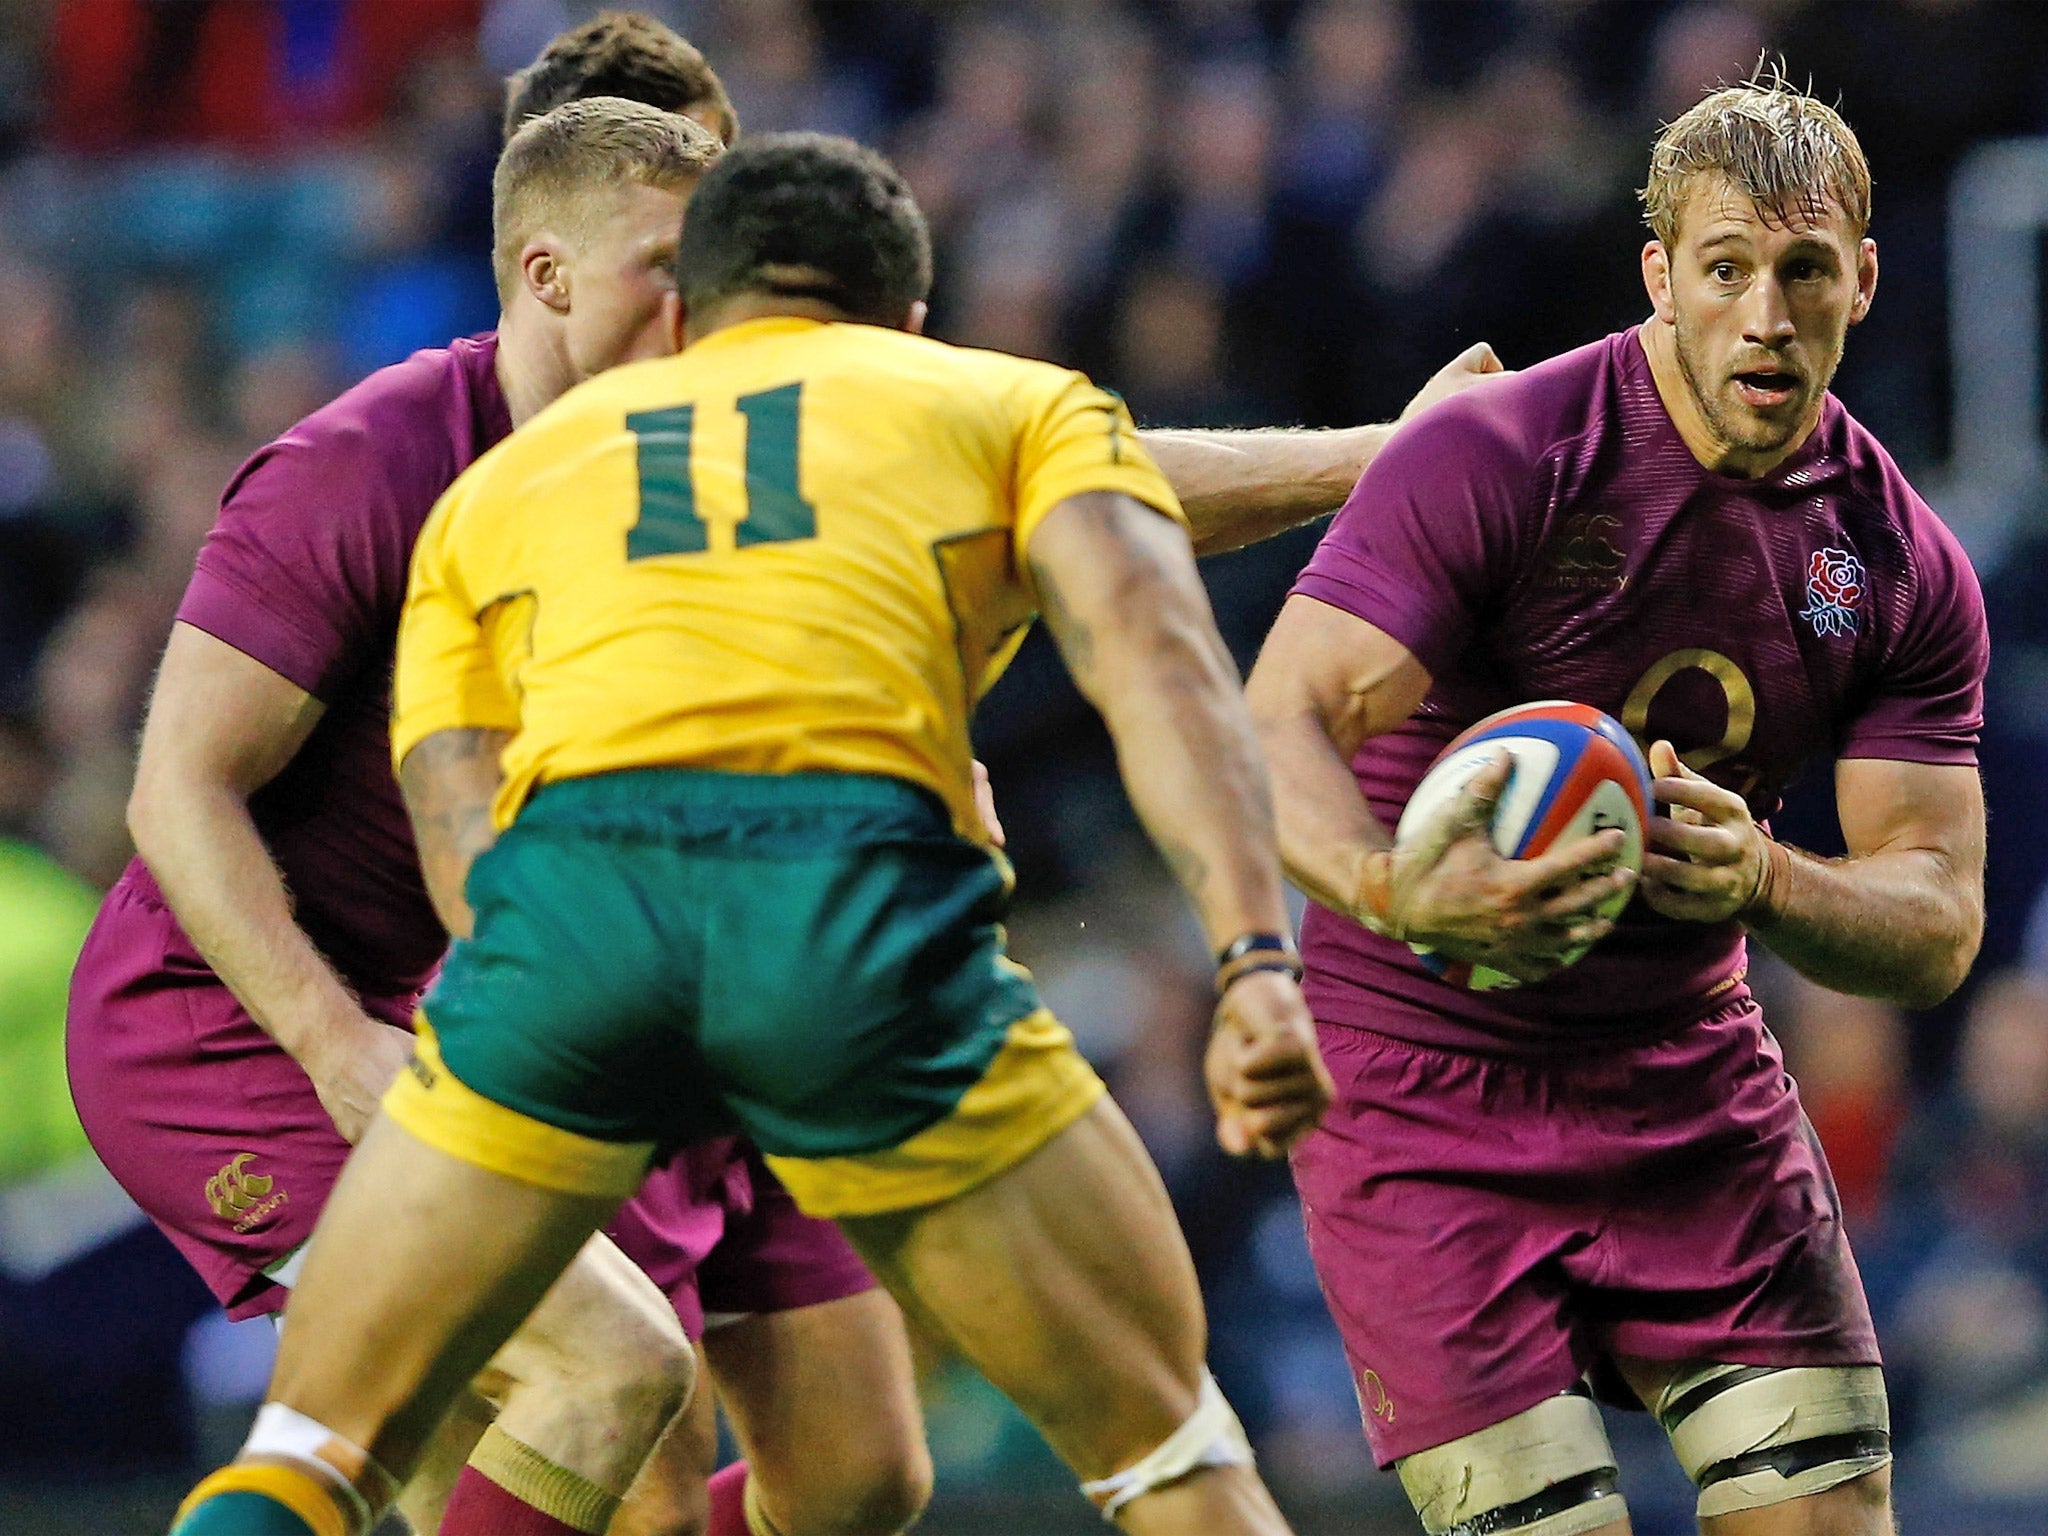 Chris Robshaw will have learned a lot from the defeat by Australia